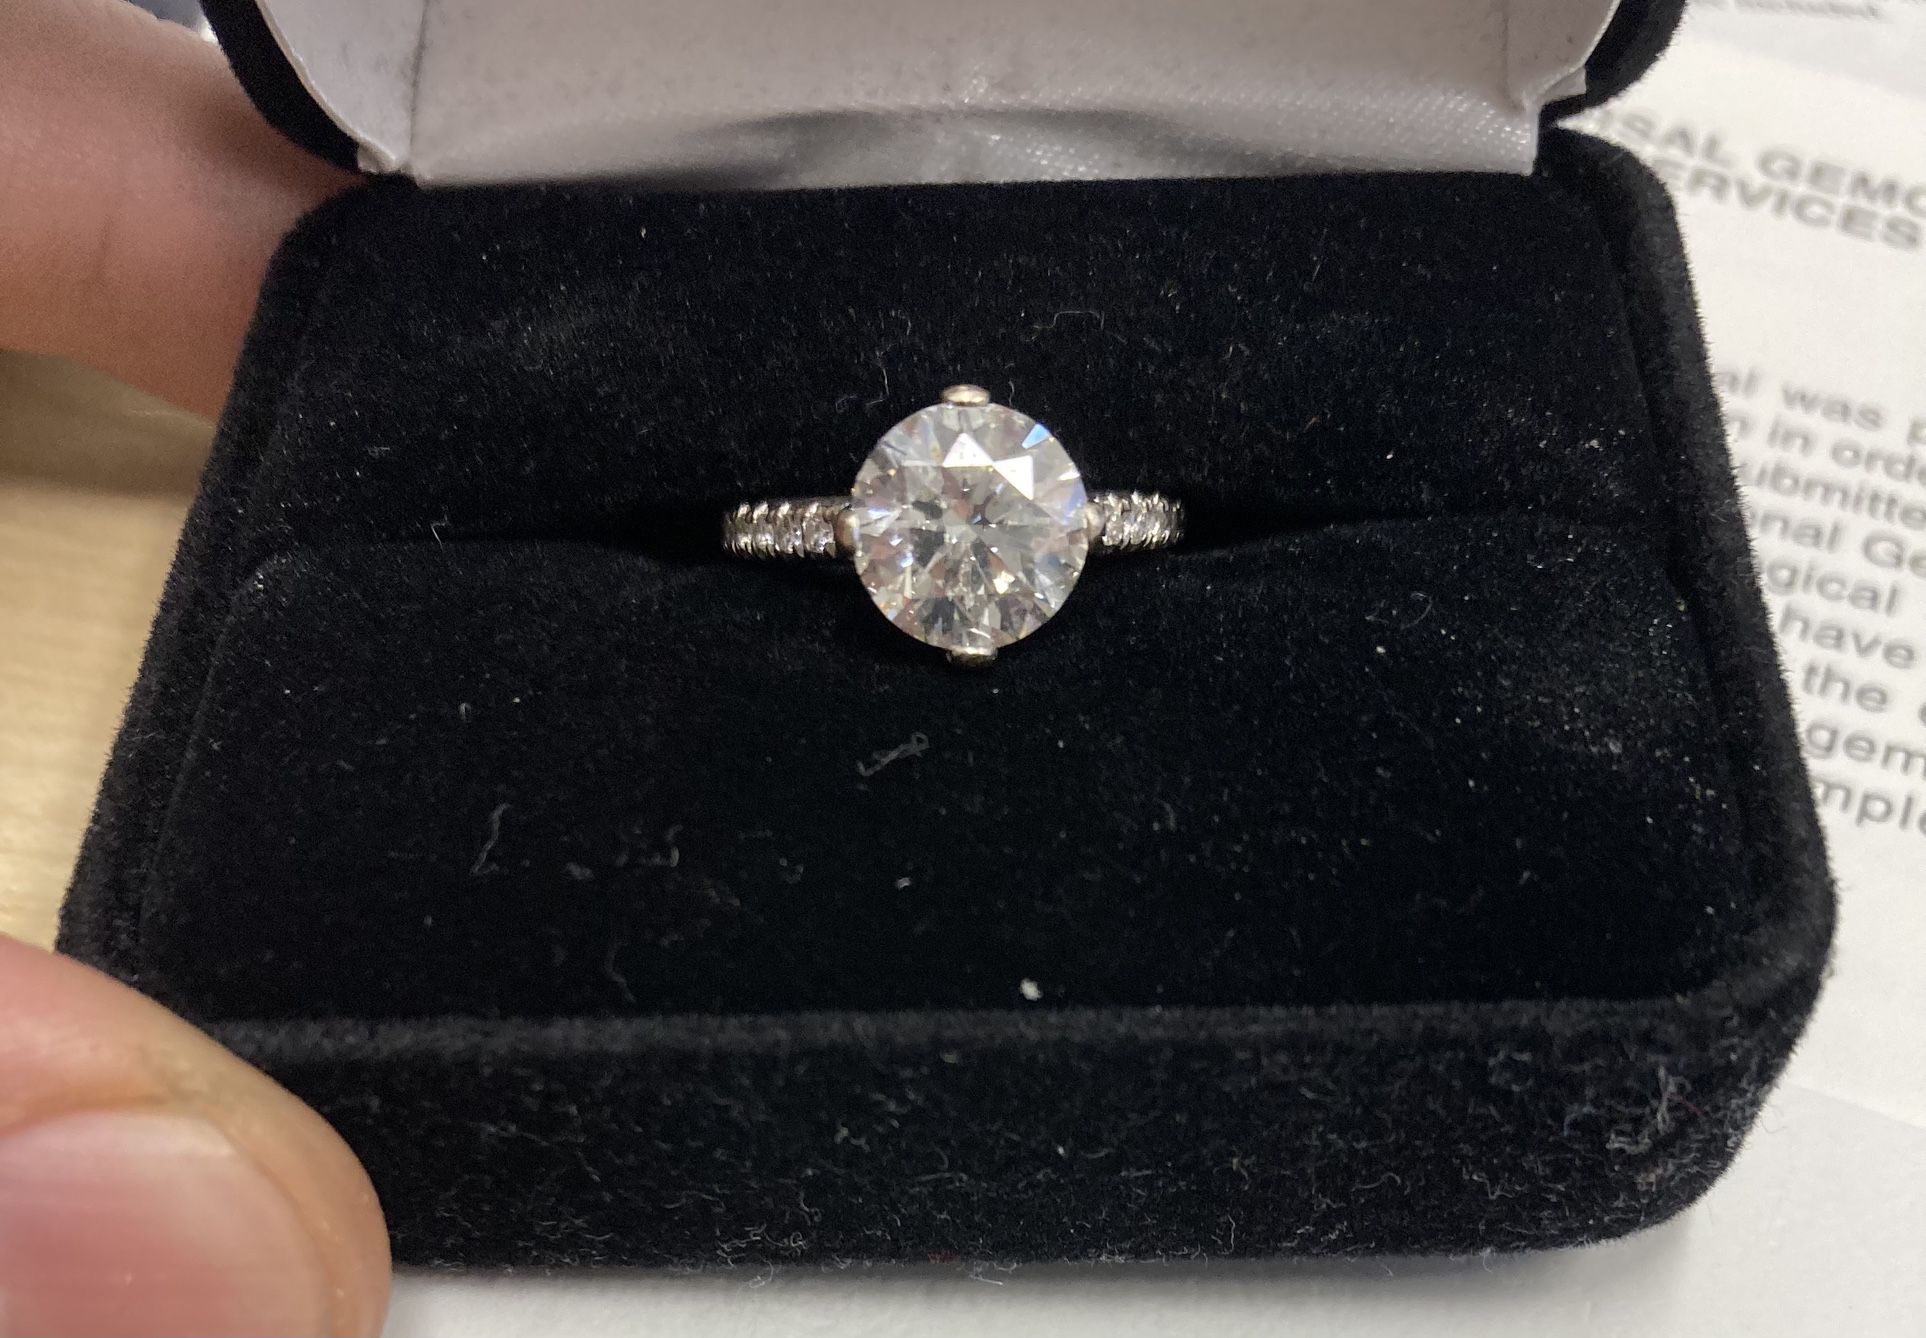 $25,000 2.3 CT Diamond Engagement Ring And Diamond Band With All Certificates And Appraisal 